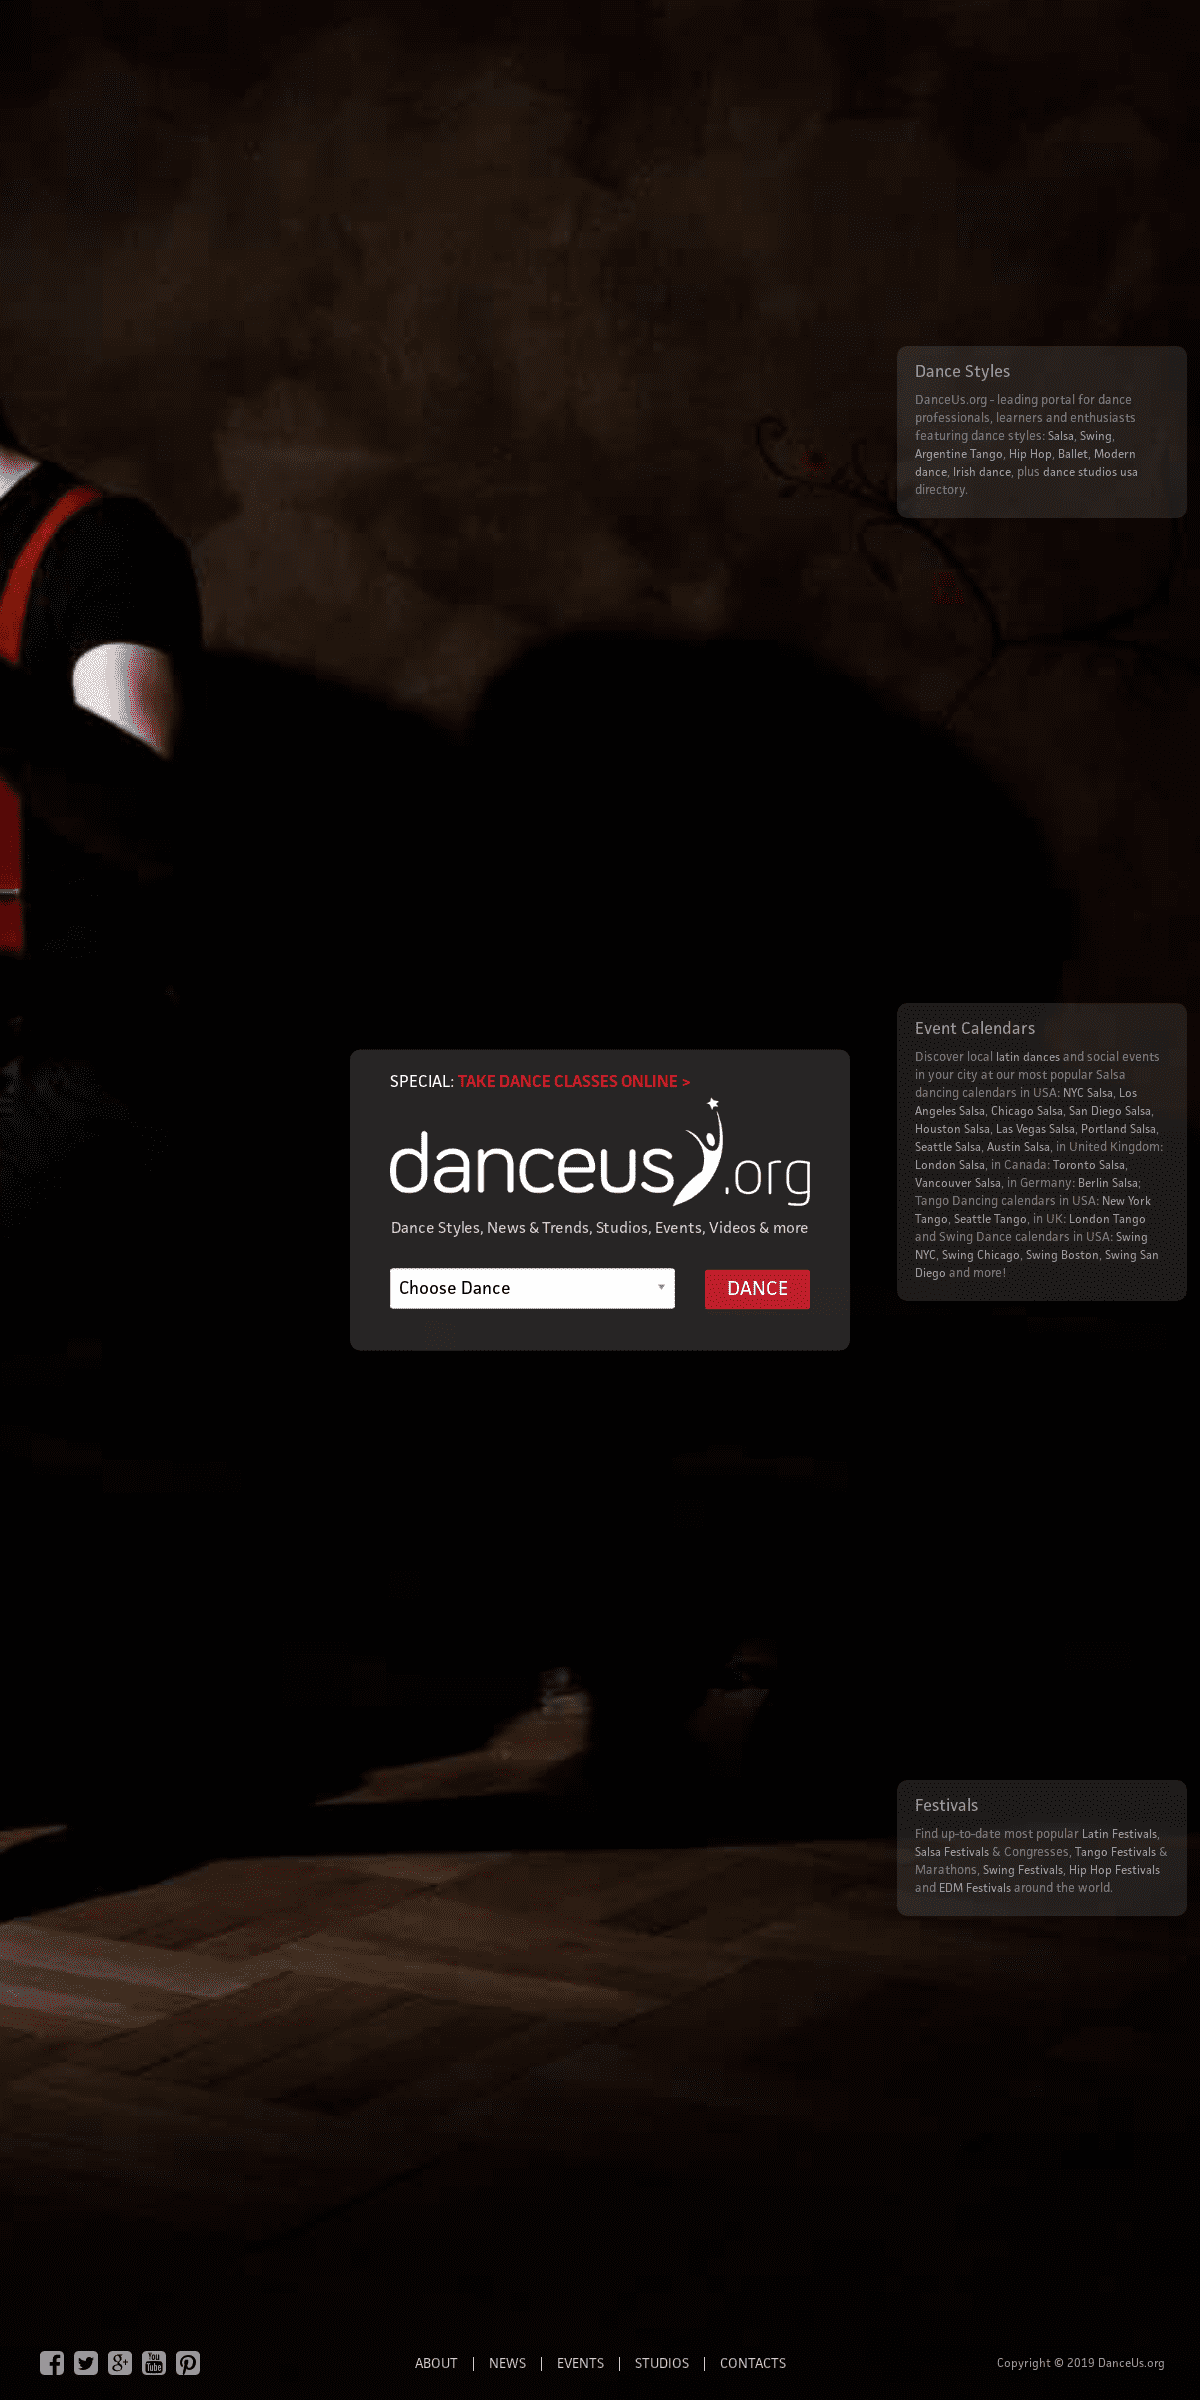 A complete backup of danceus.org